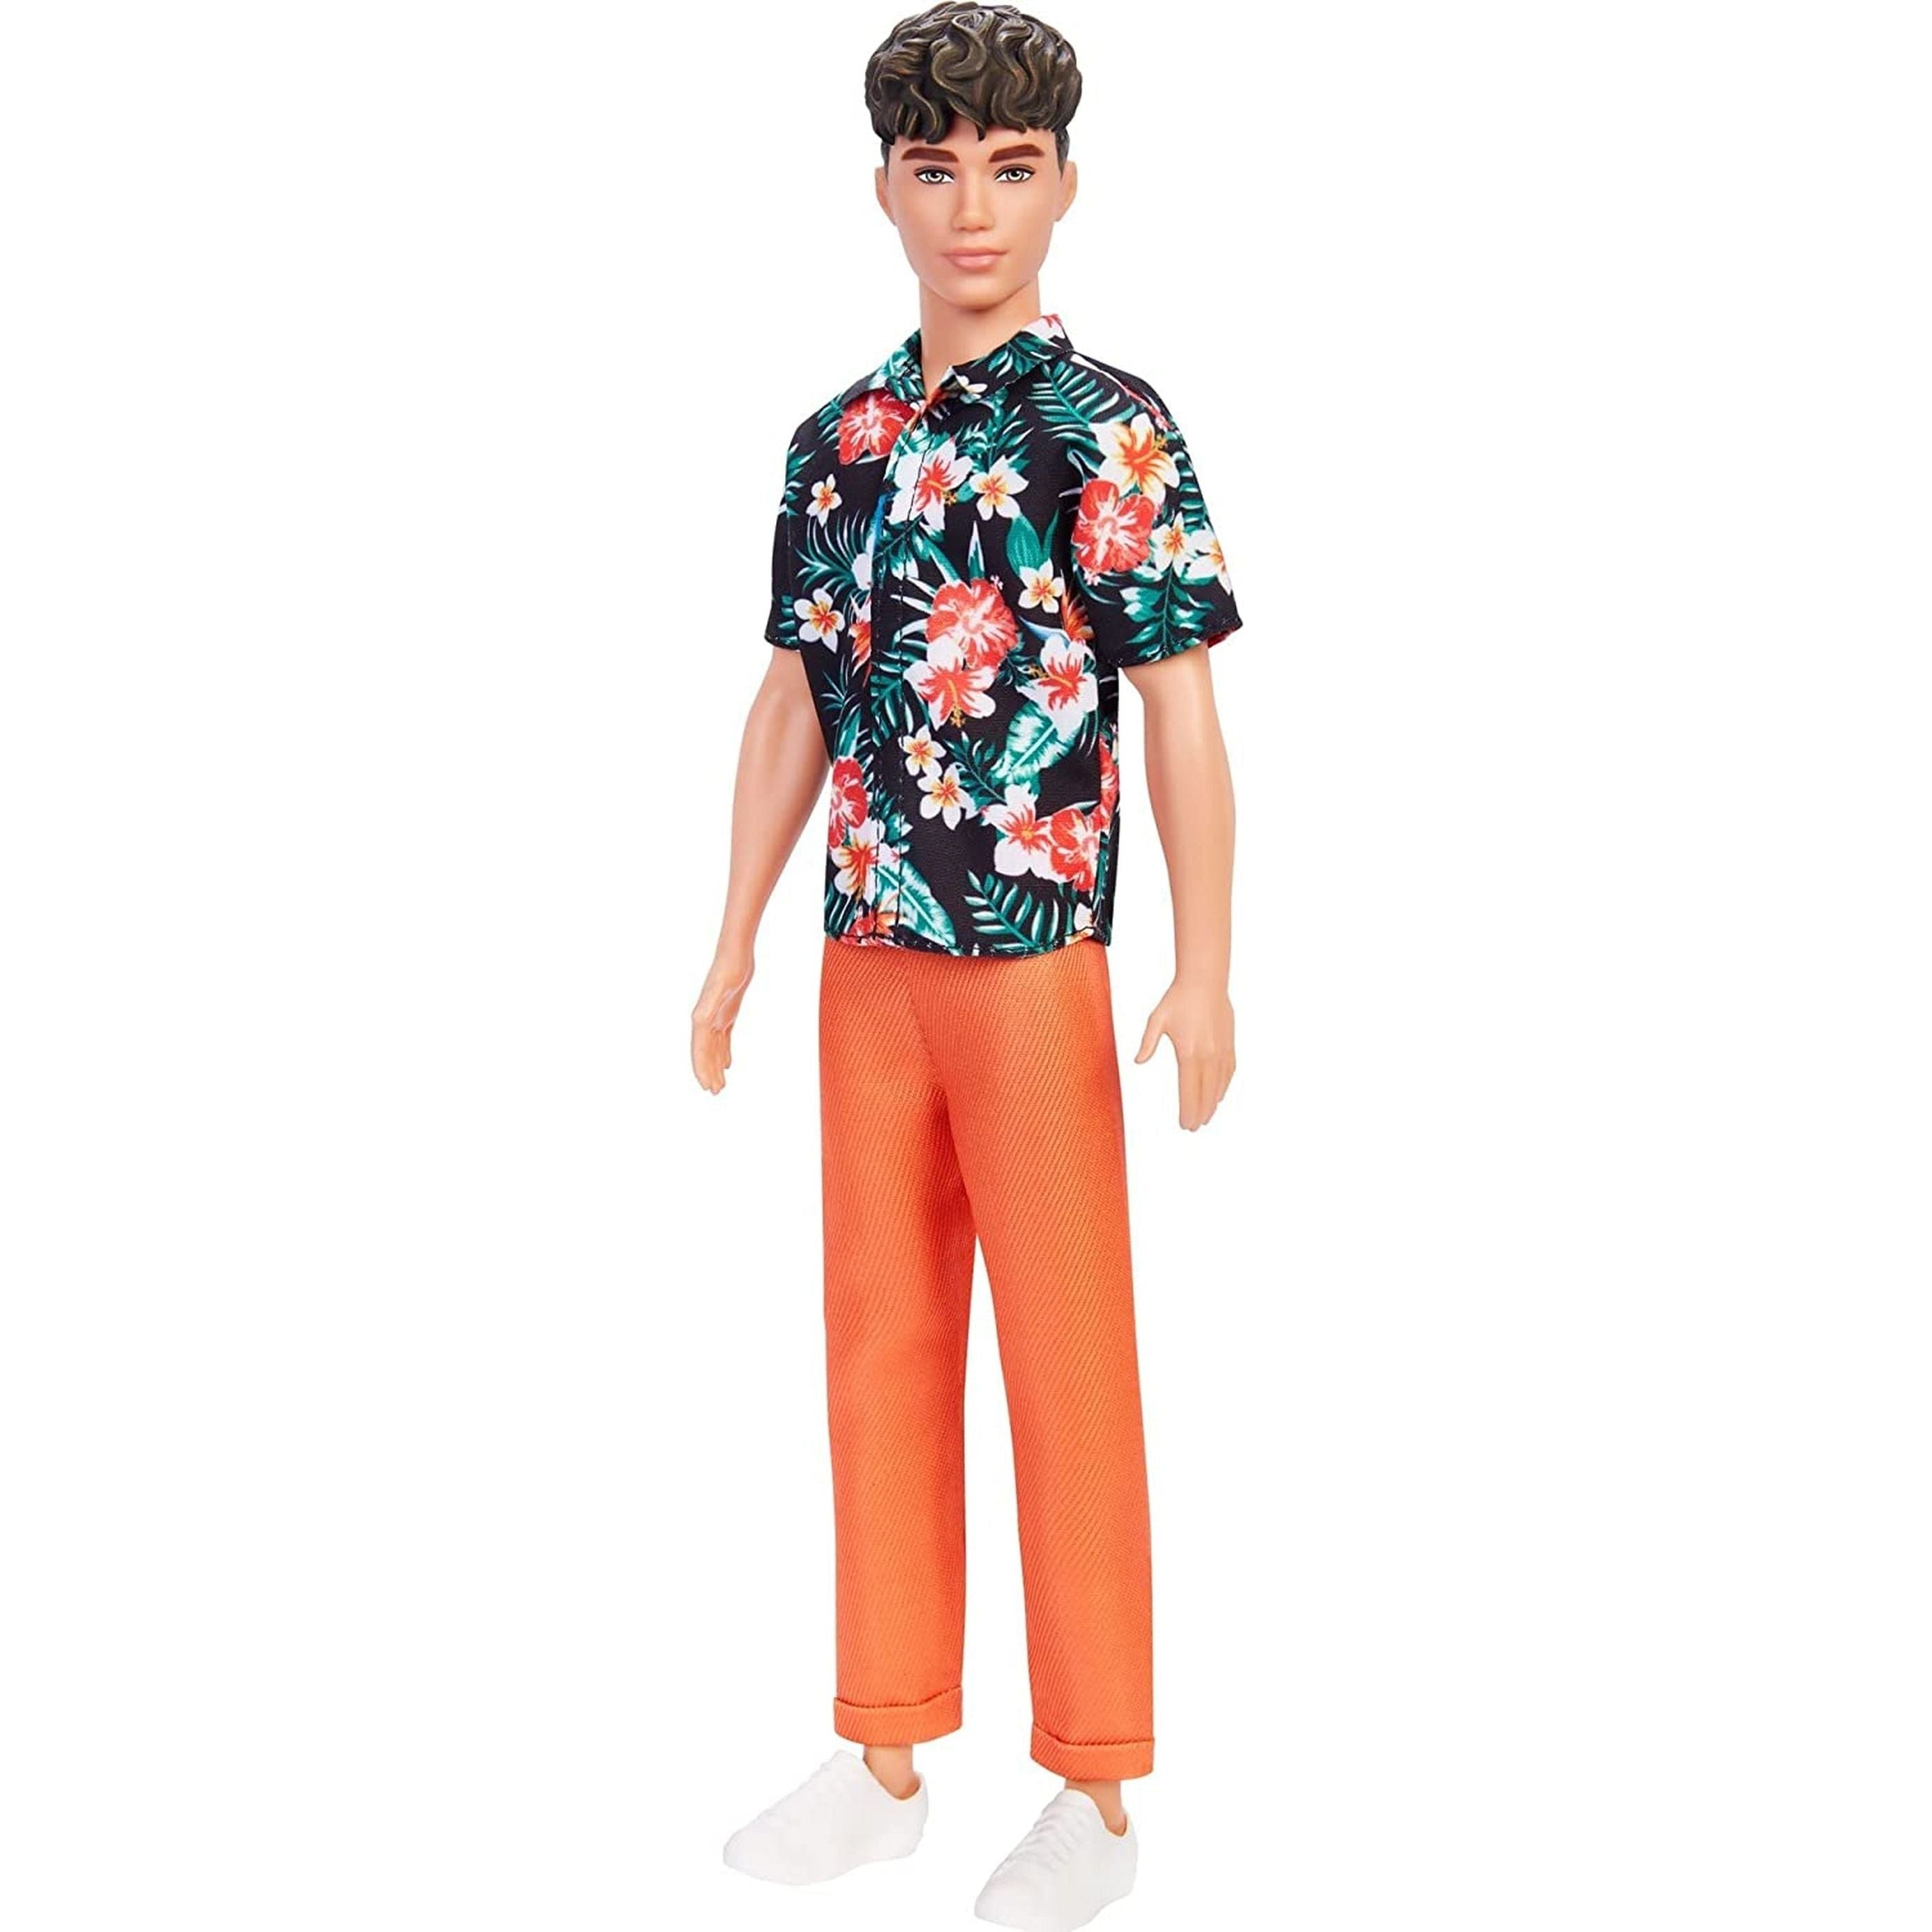 Ken Fashionistas Doll #184 with Brown Cropped Hair, Hawaiian Shirt, Orange Pants and White Deck Shoes